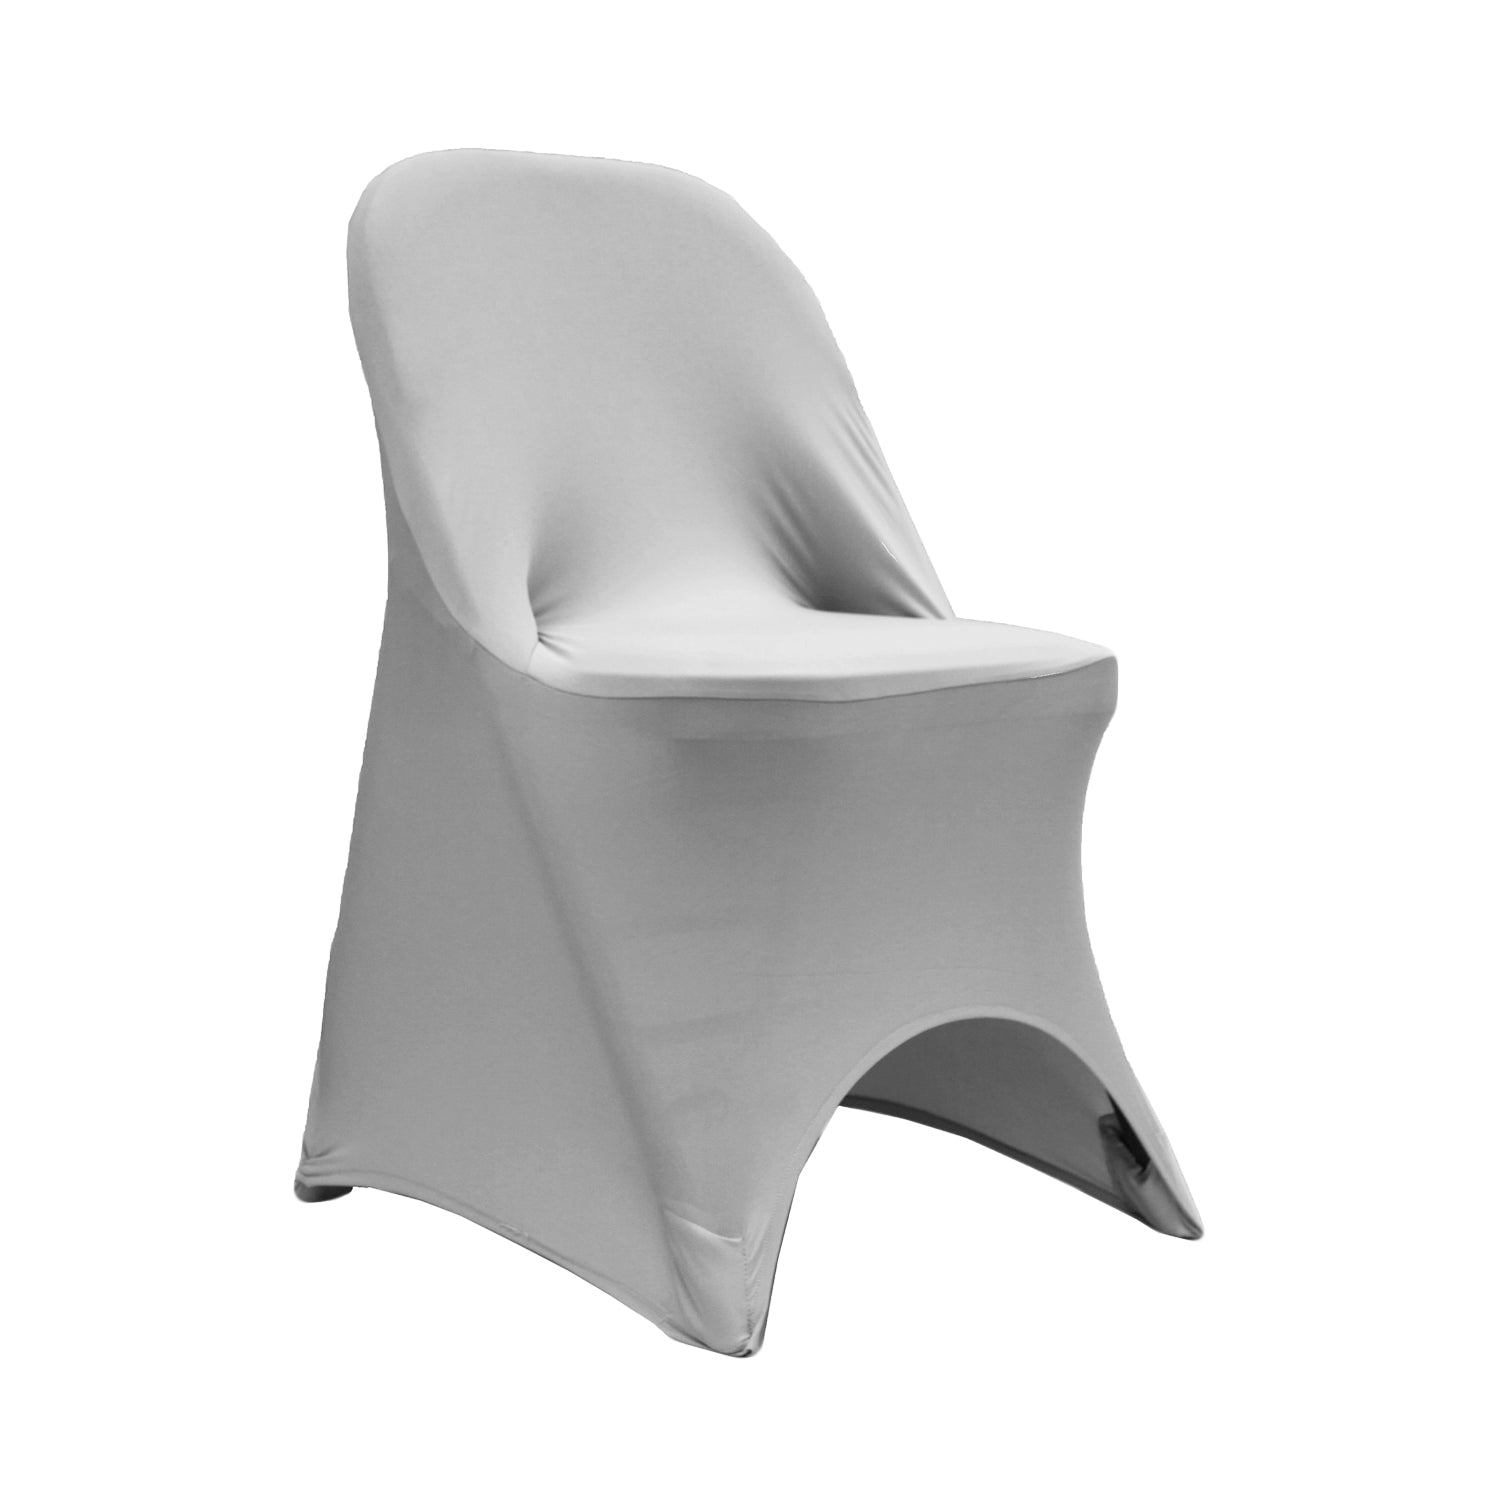 Folding Spandex Chair Cover - Silver